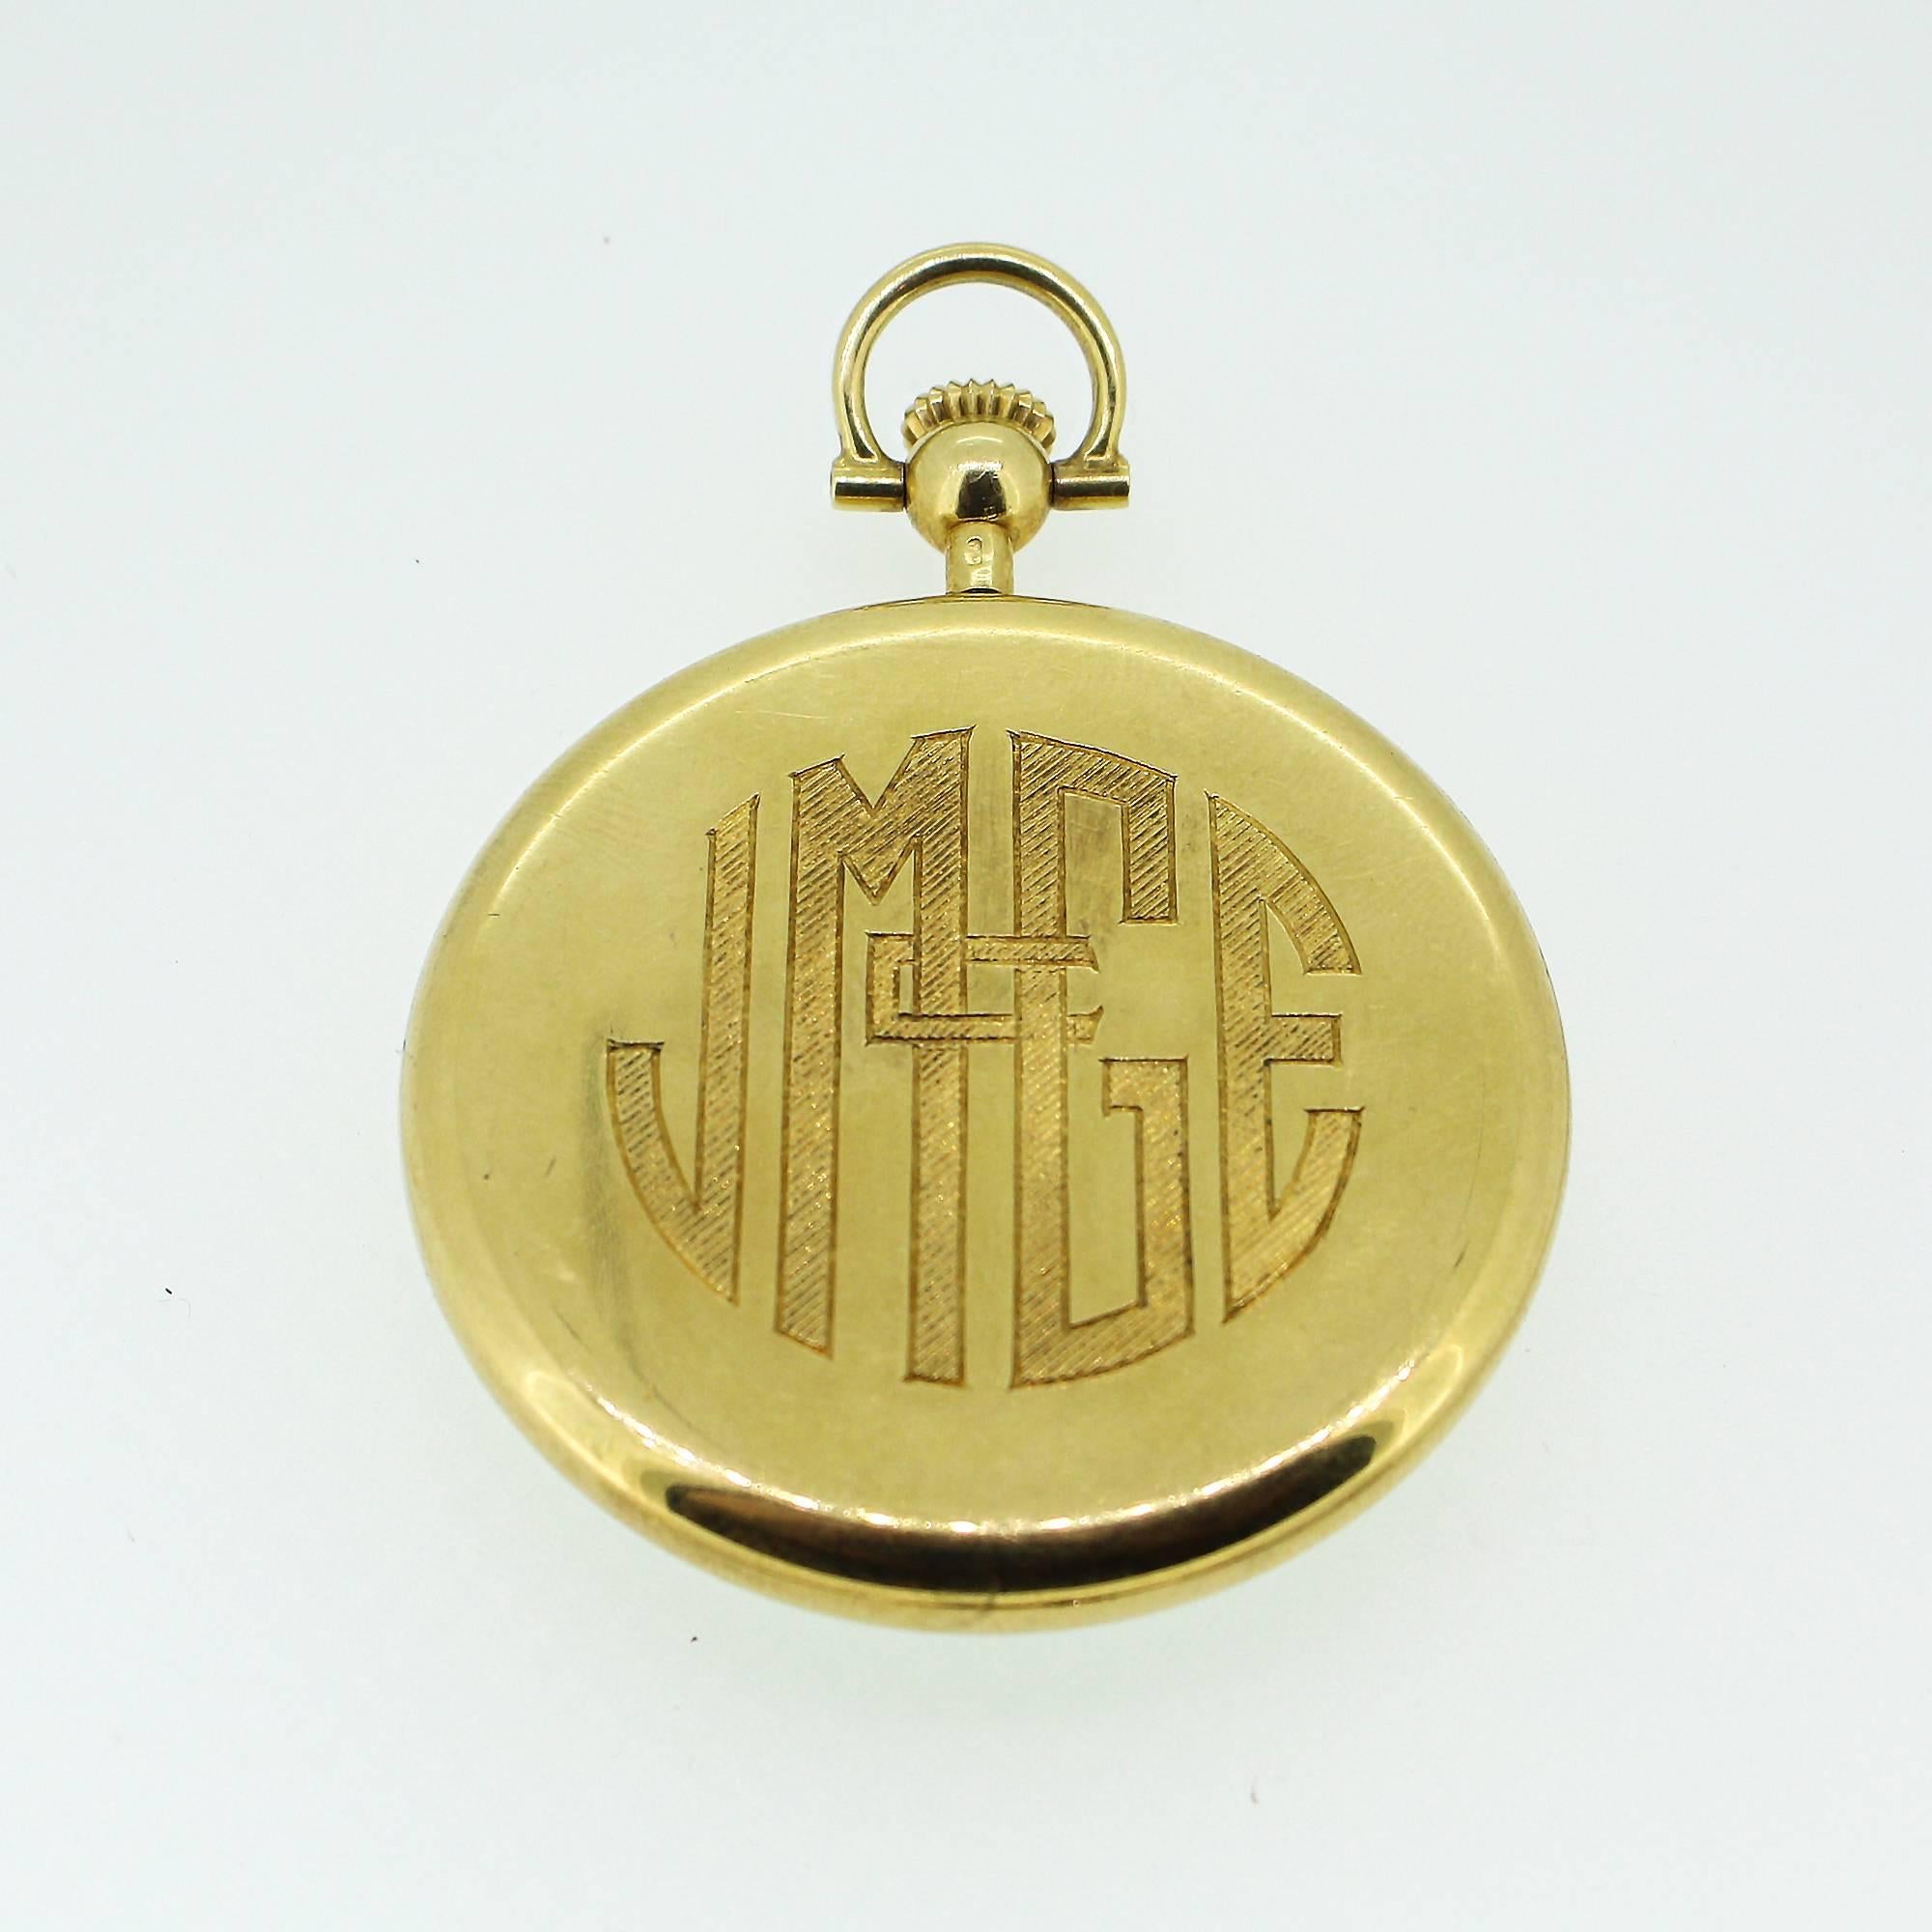 A vintage Tiffany & Co pocket watch in 18k yellow gold with a white face and gold numerals. The watch appears to be working and is in excellent condition, and the back is monogrammed. The 17 jewel movement and case is signed 